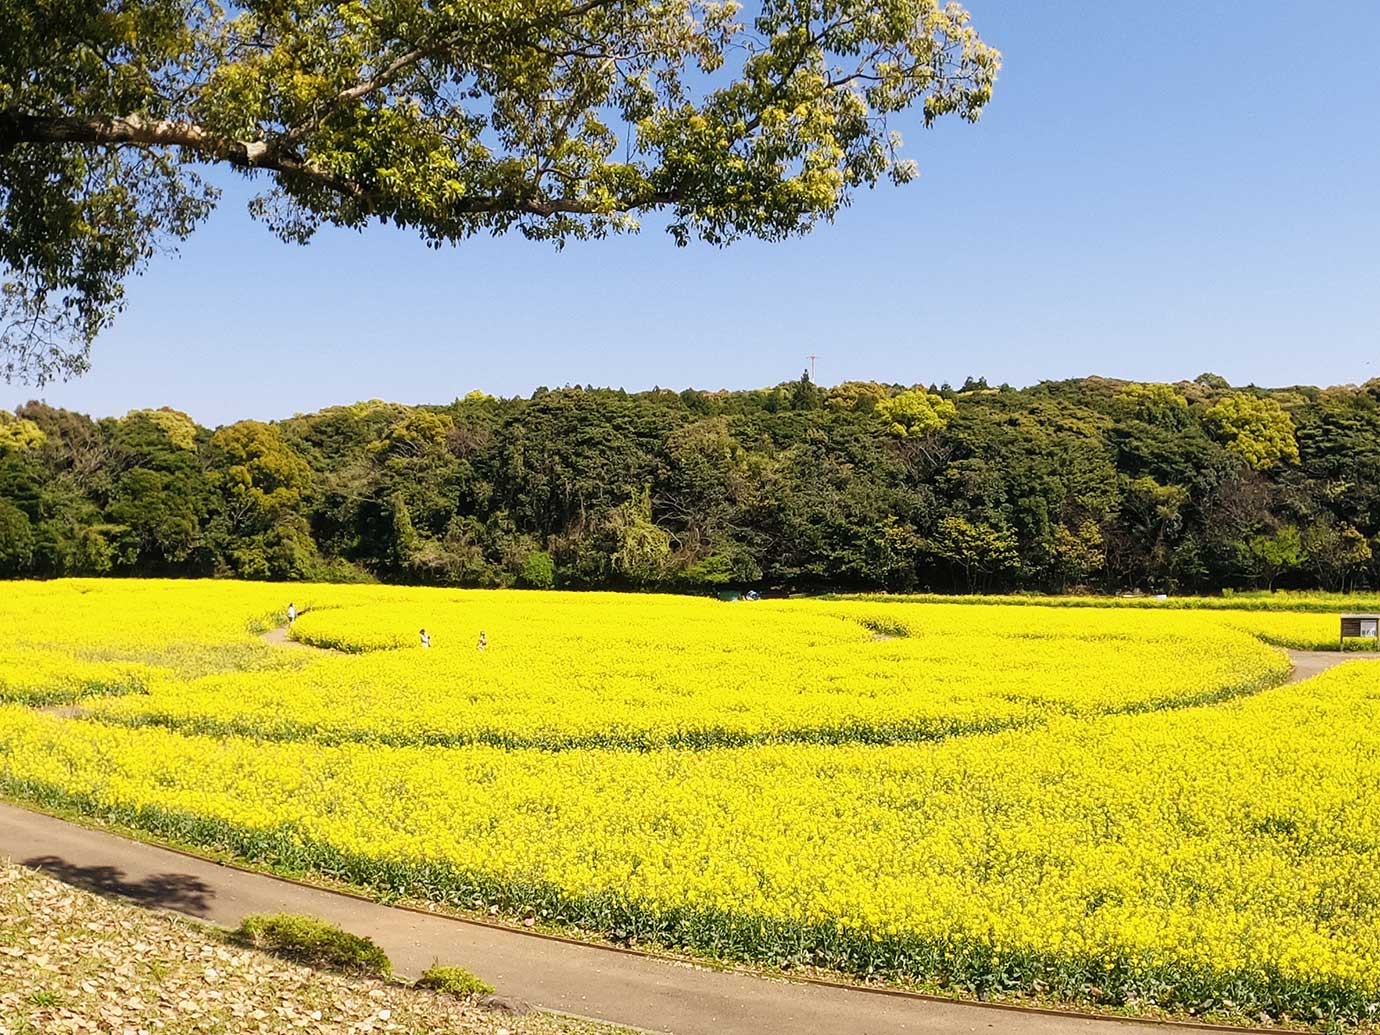 Canola blossoms at Tenkaiho
* Already posted as a tourist facility ?